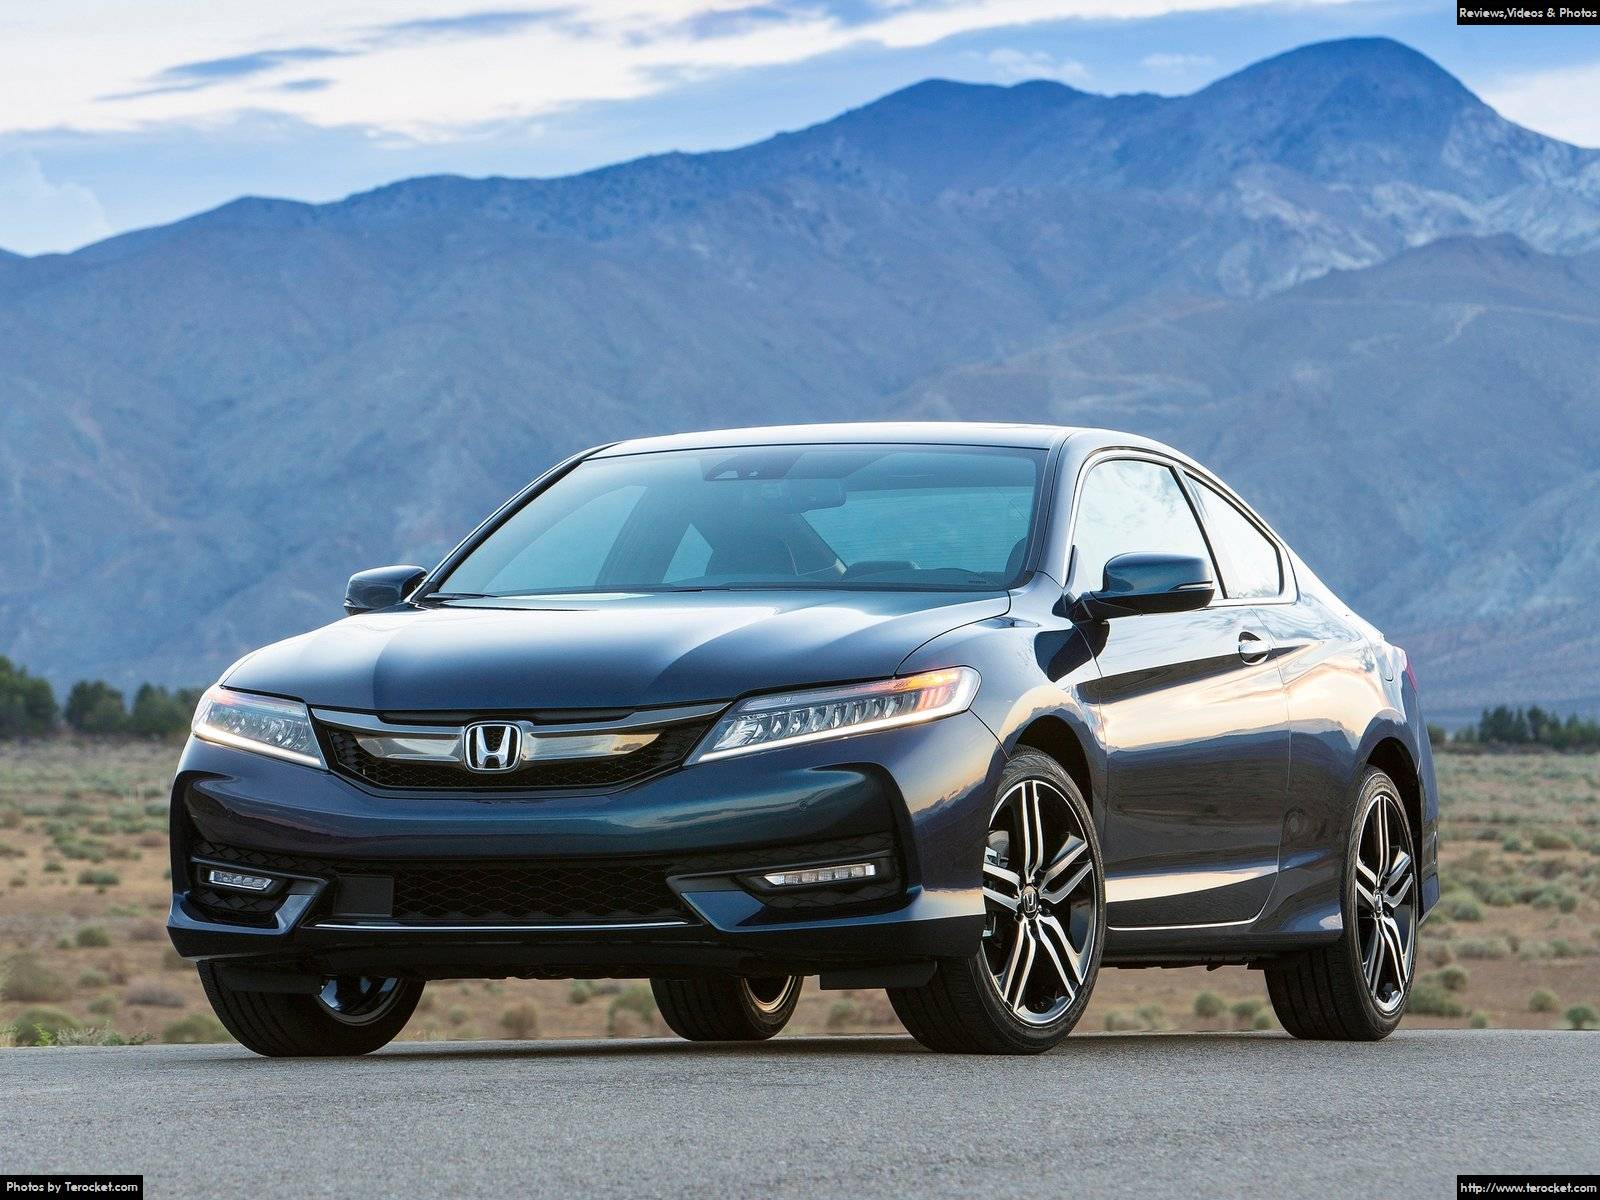 A Wealth of Accessories for the New 2016 Honda Accord